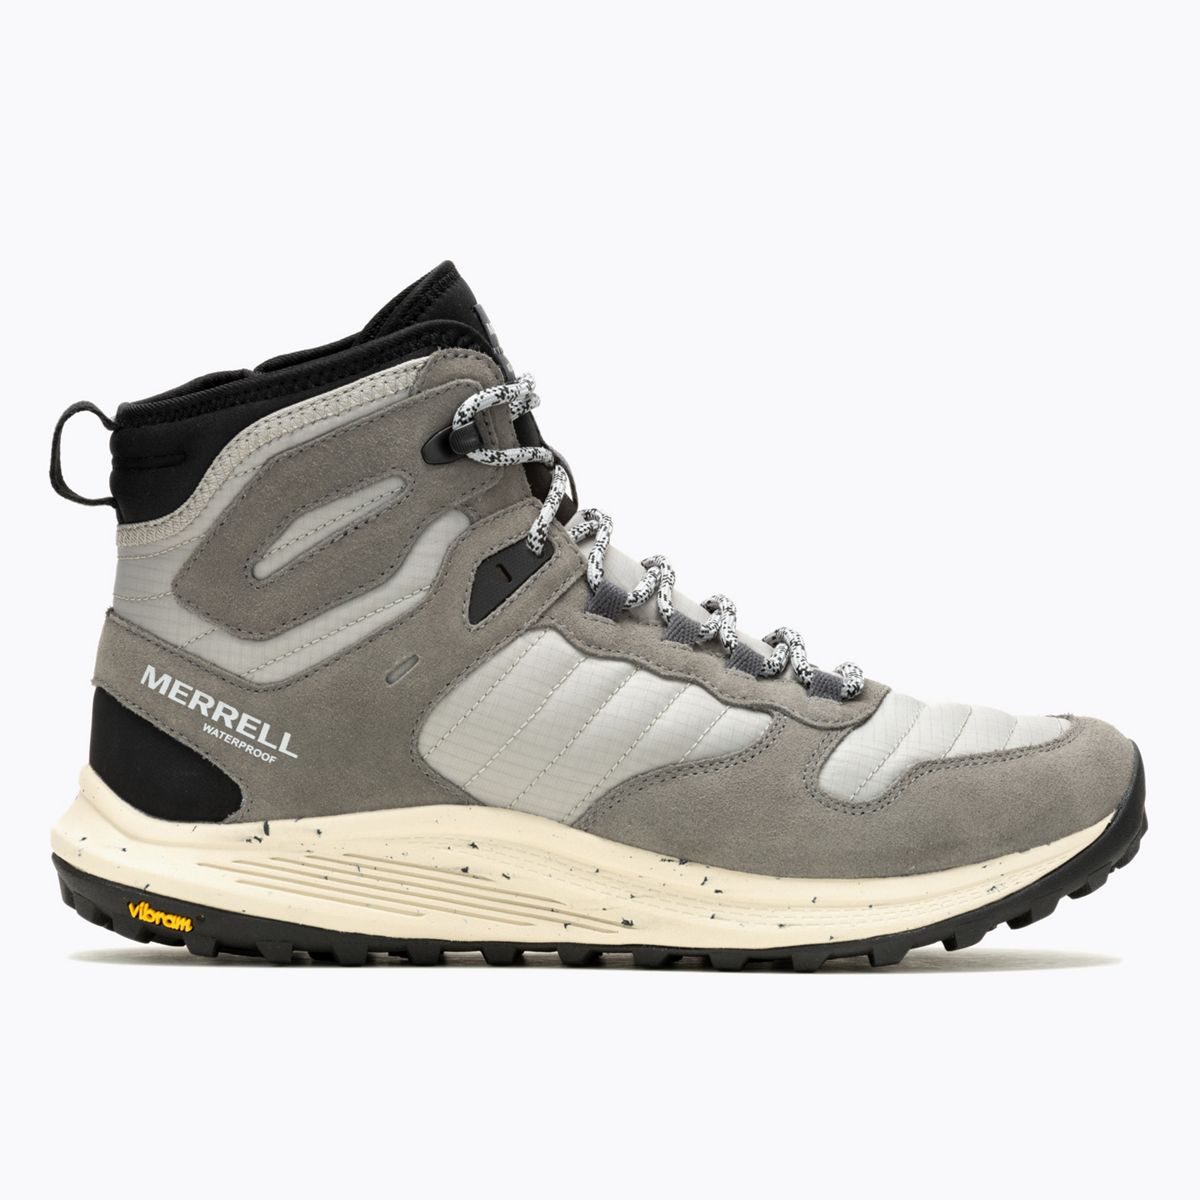 Shop All Winter Hiking Boots